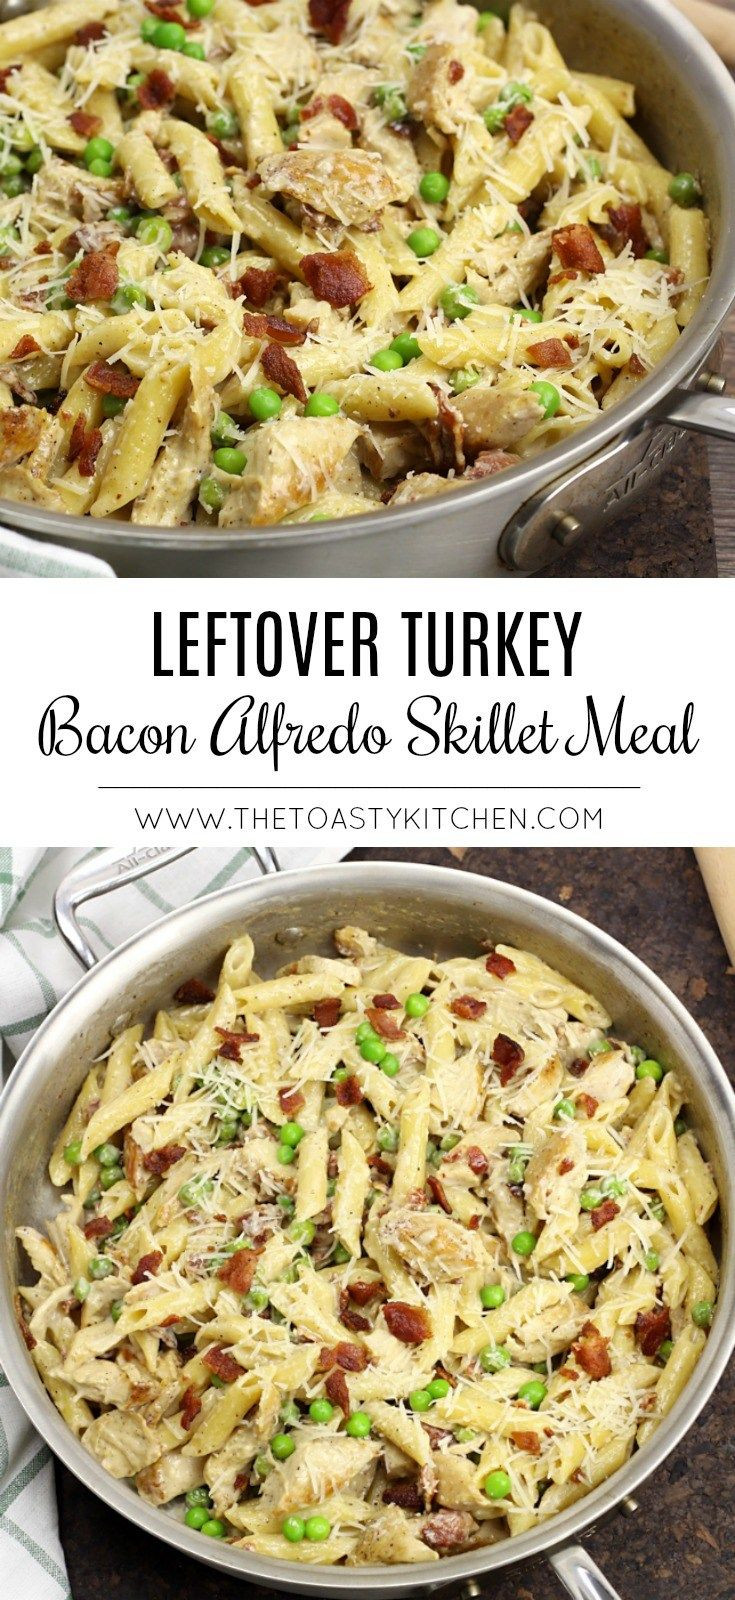 Leftover Chicken Breast Casserole
 Leftover Turkey Bacon Alfredo Skillet Meal by The Toasty